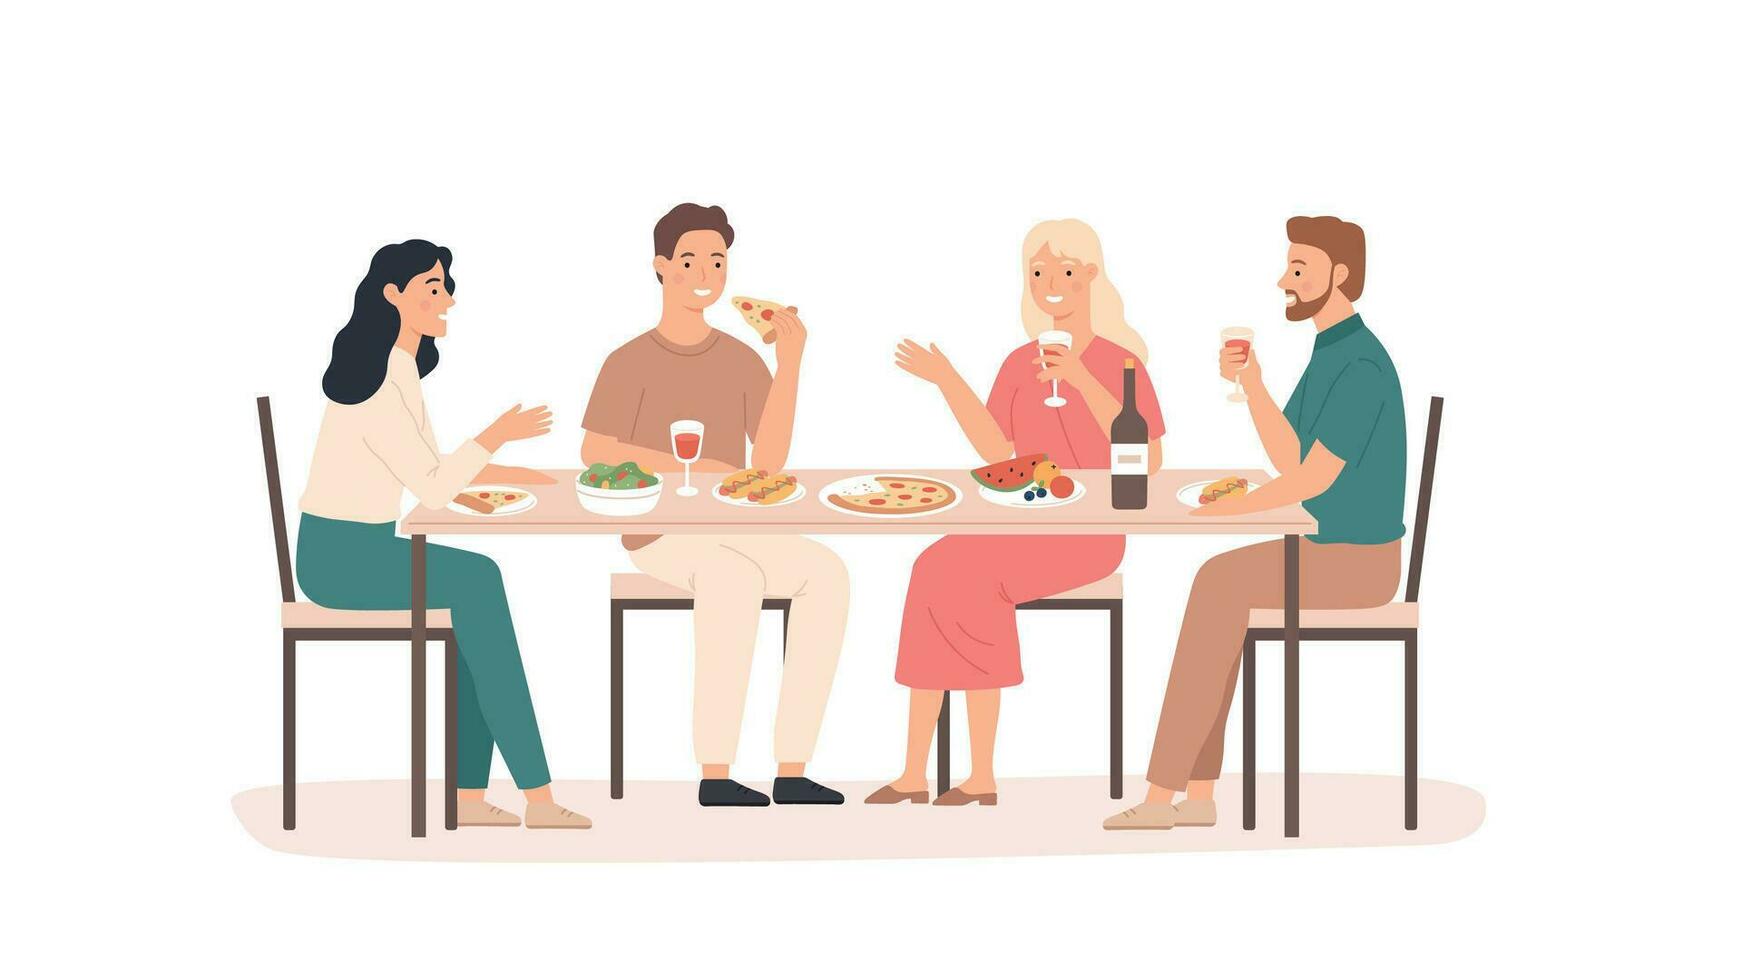 Friends eating. Fun and smiling people at table in restaurant, cafe or home drink beverage, eat tasty dishes friendly hangout vector concept